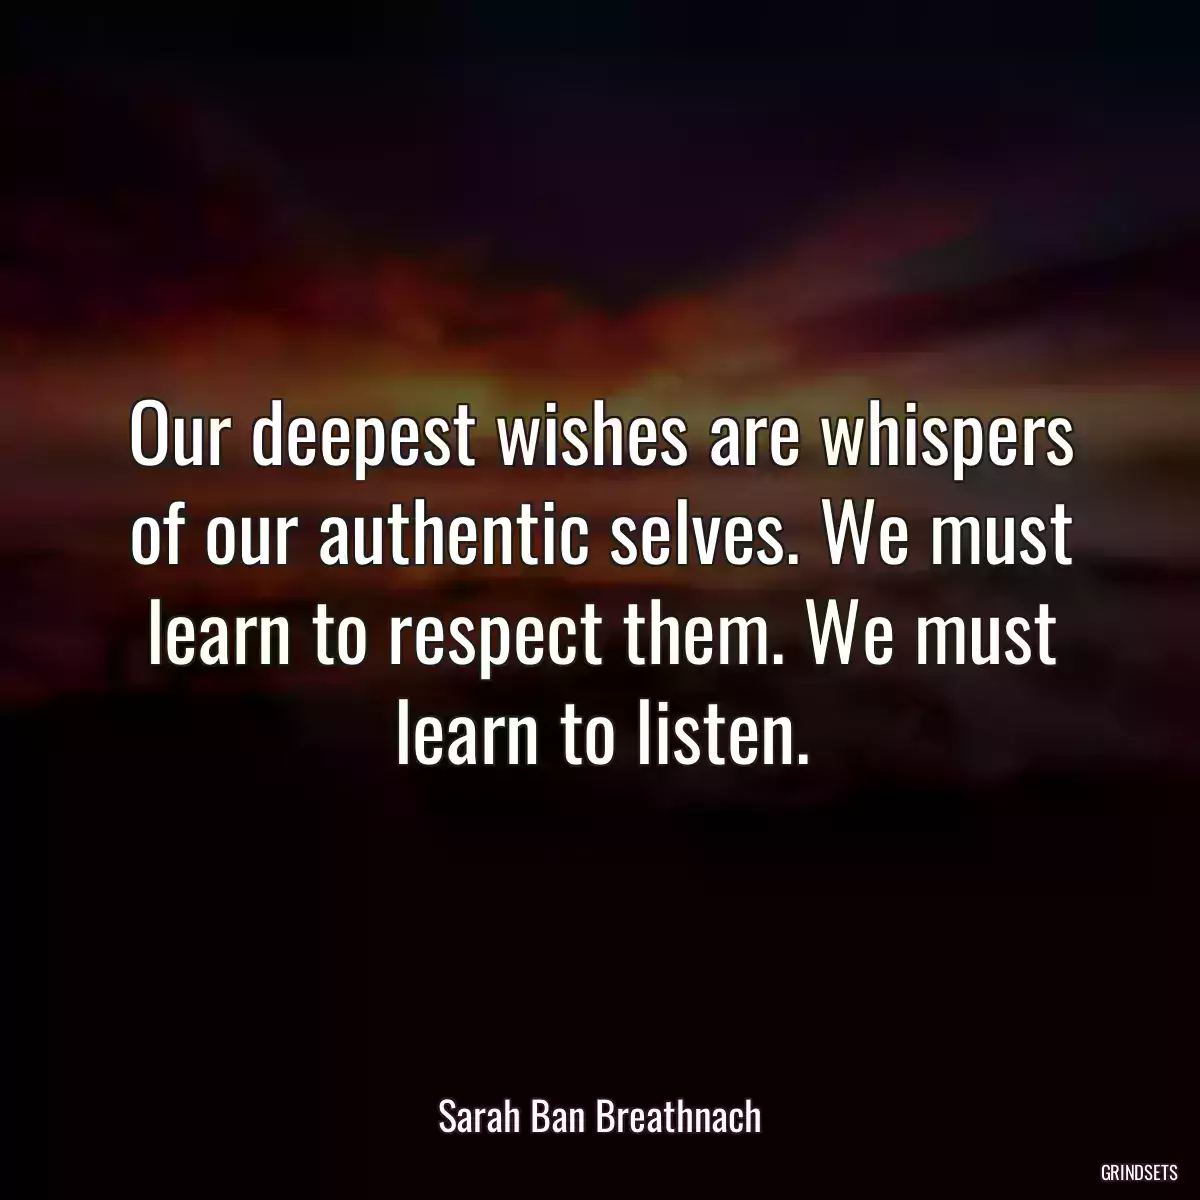 Our deepest wishes are whispers of our authentic selves. We must learn to respect them. We must learn to listen.